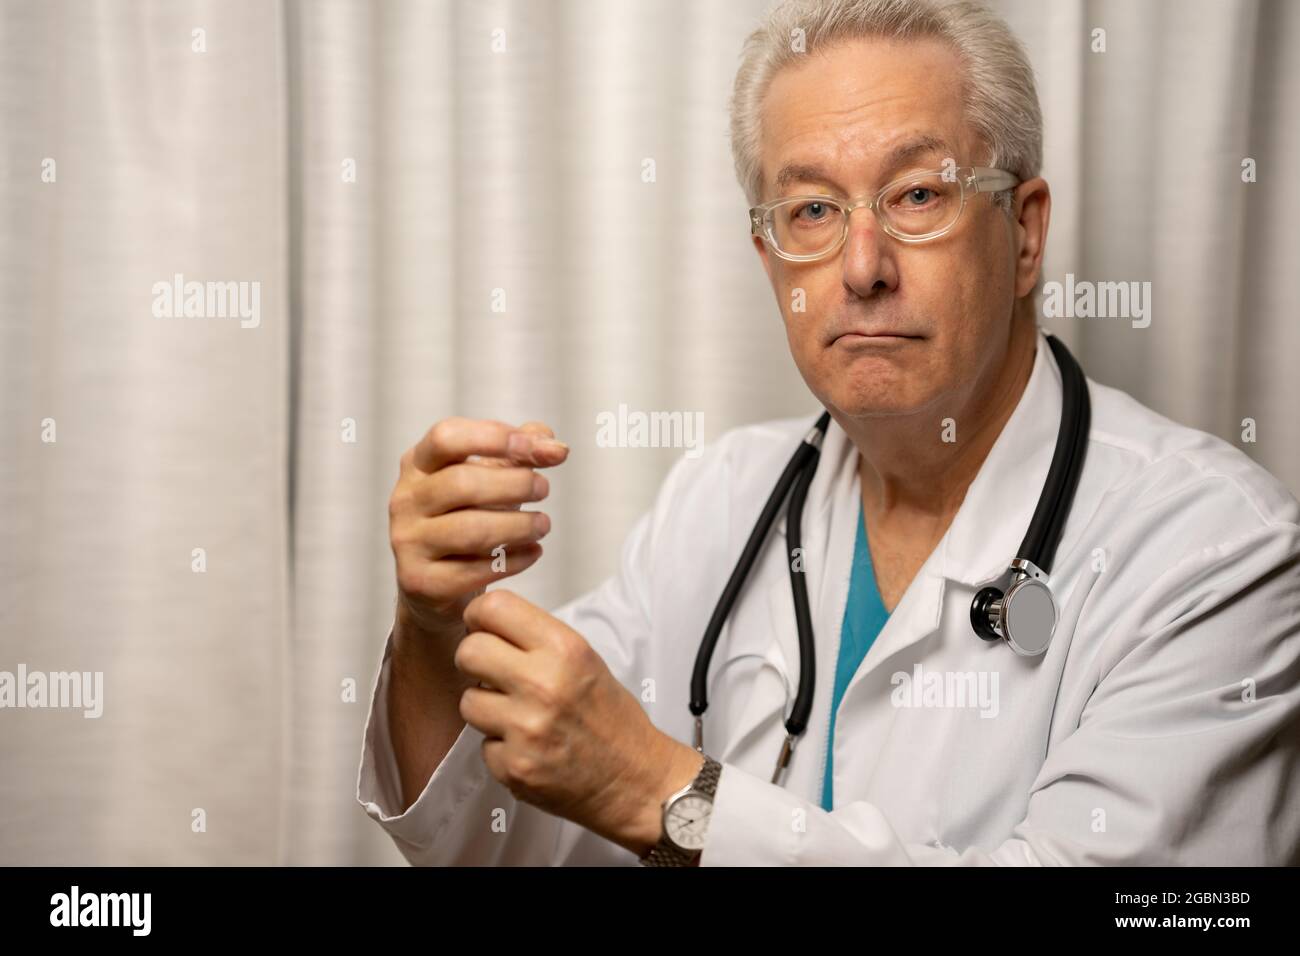 Medical doctor holding up empty space in hands Stock Photo